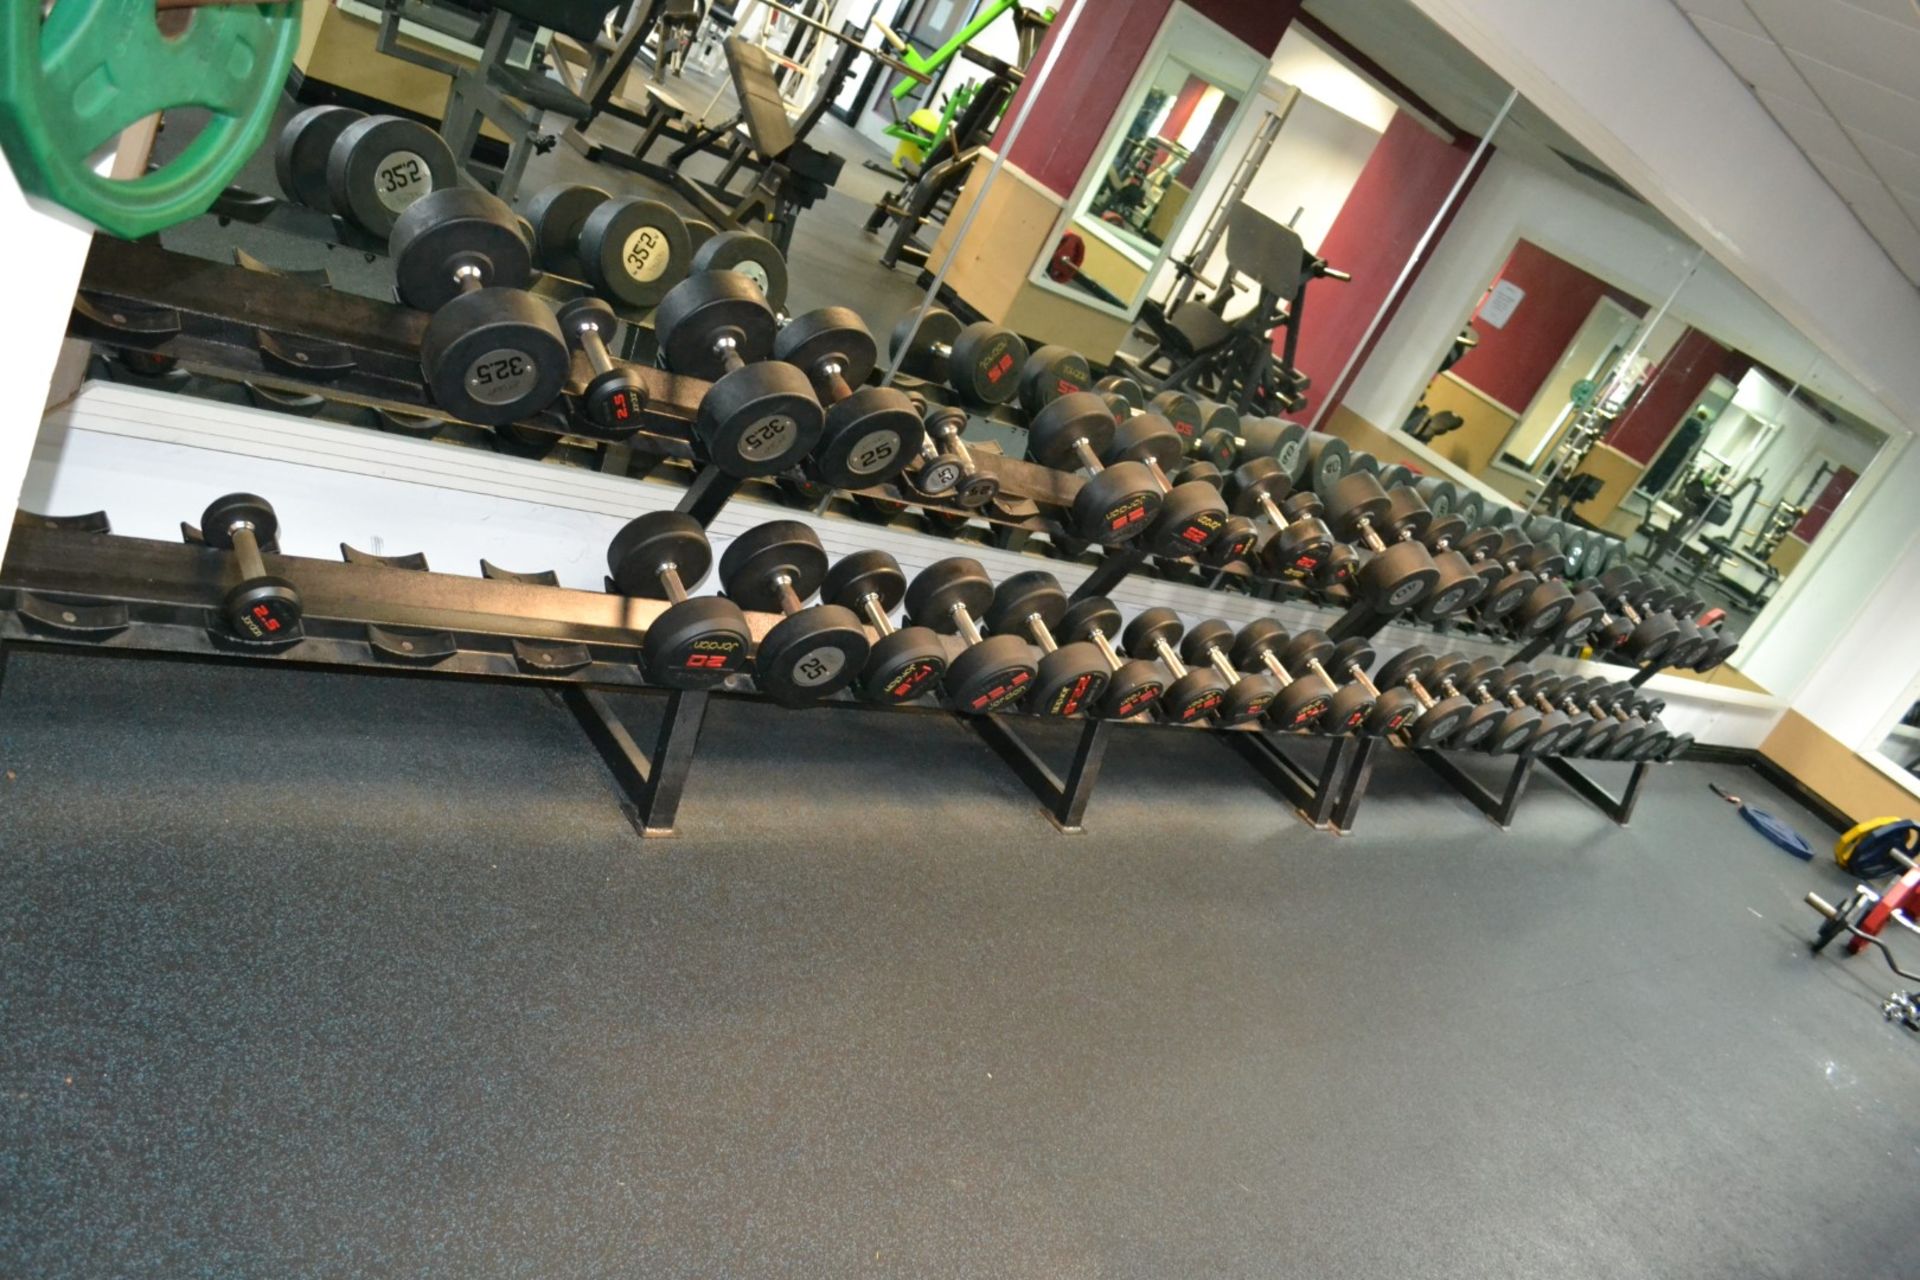 1 x Large Dumbells Rack With Approx 42 x Dumbell 5-40kg Weights - Ref: J2104/GFG - CL356 - Location: - Image 4 of 5